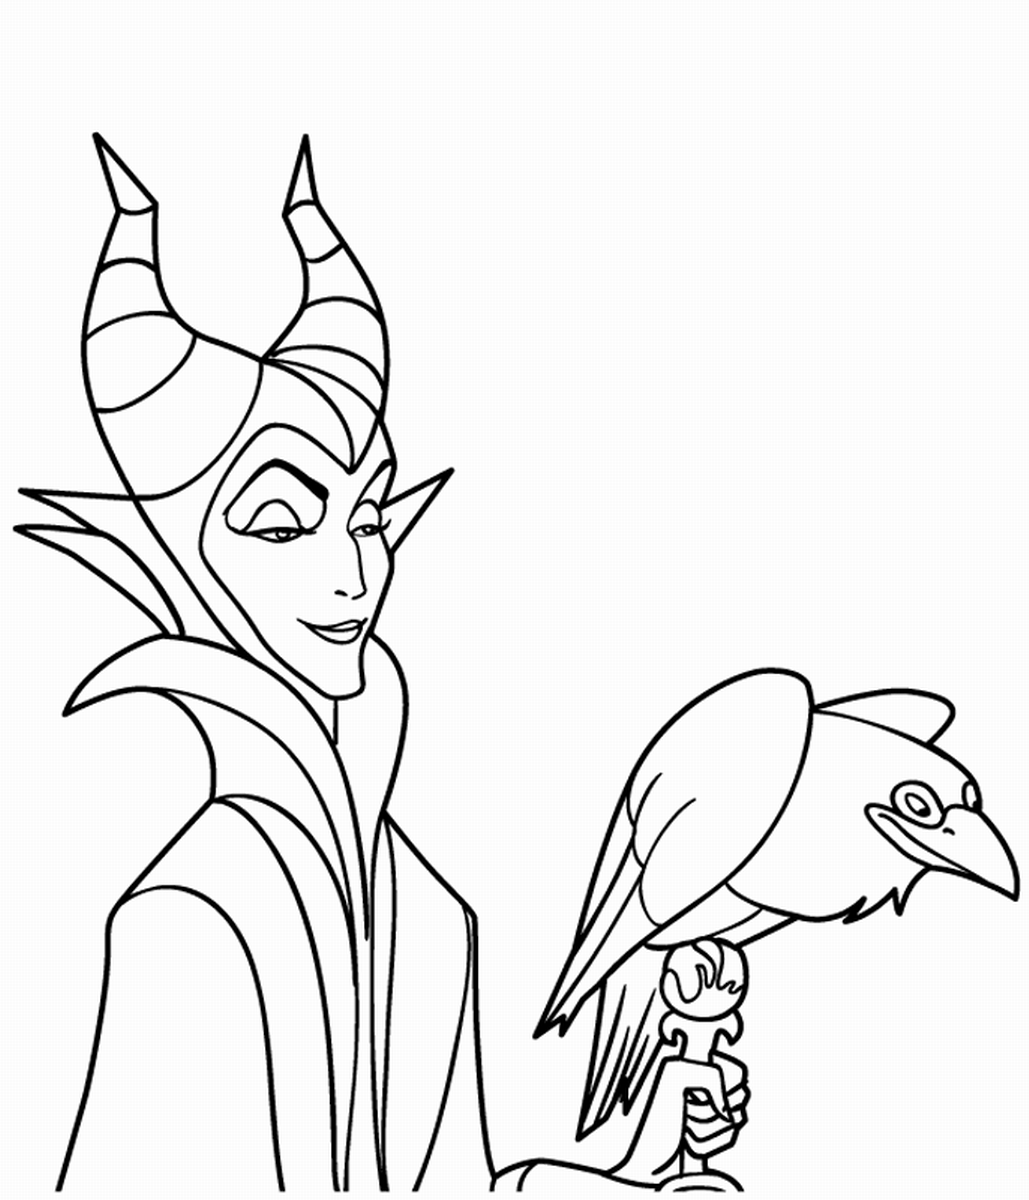 Maleficent Coloring Pages TV Film Maleficent_coloring10 Printable 2020 04823 Coloring4free